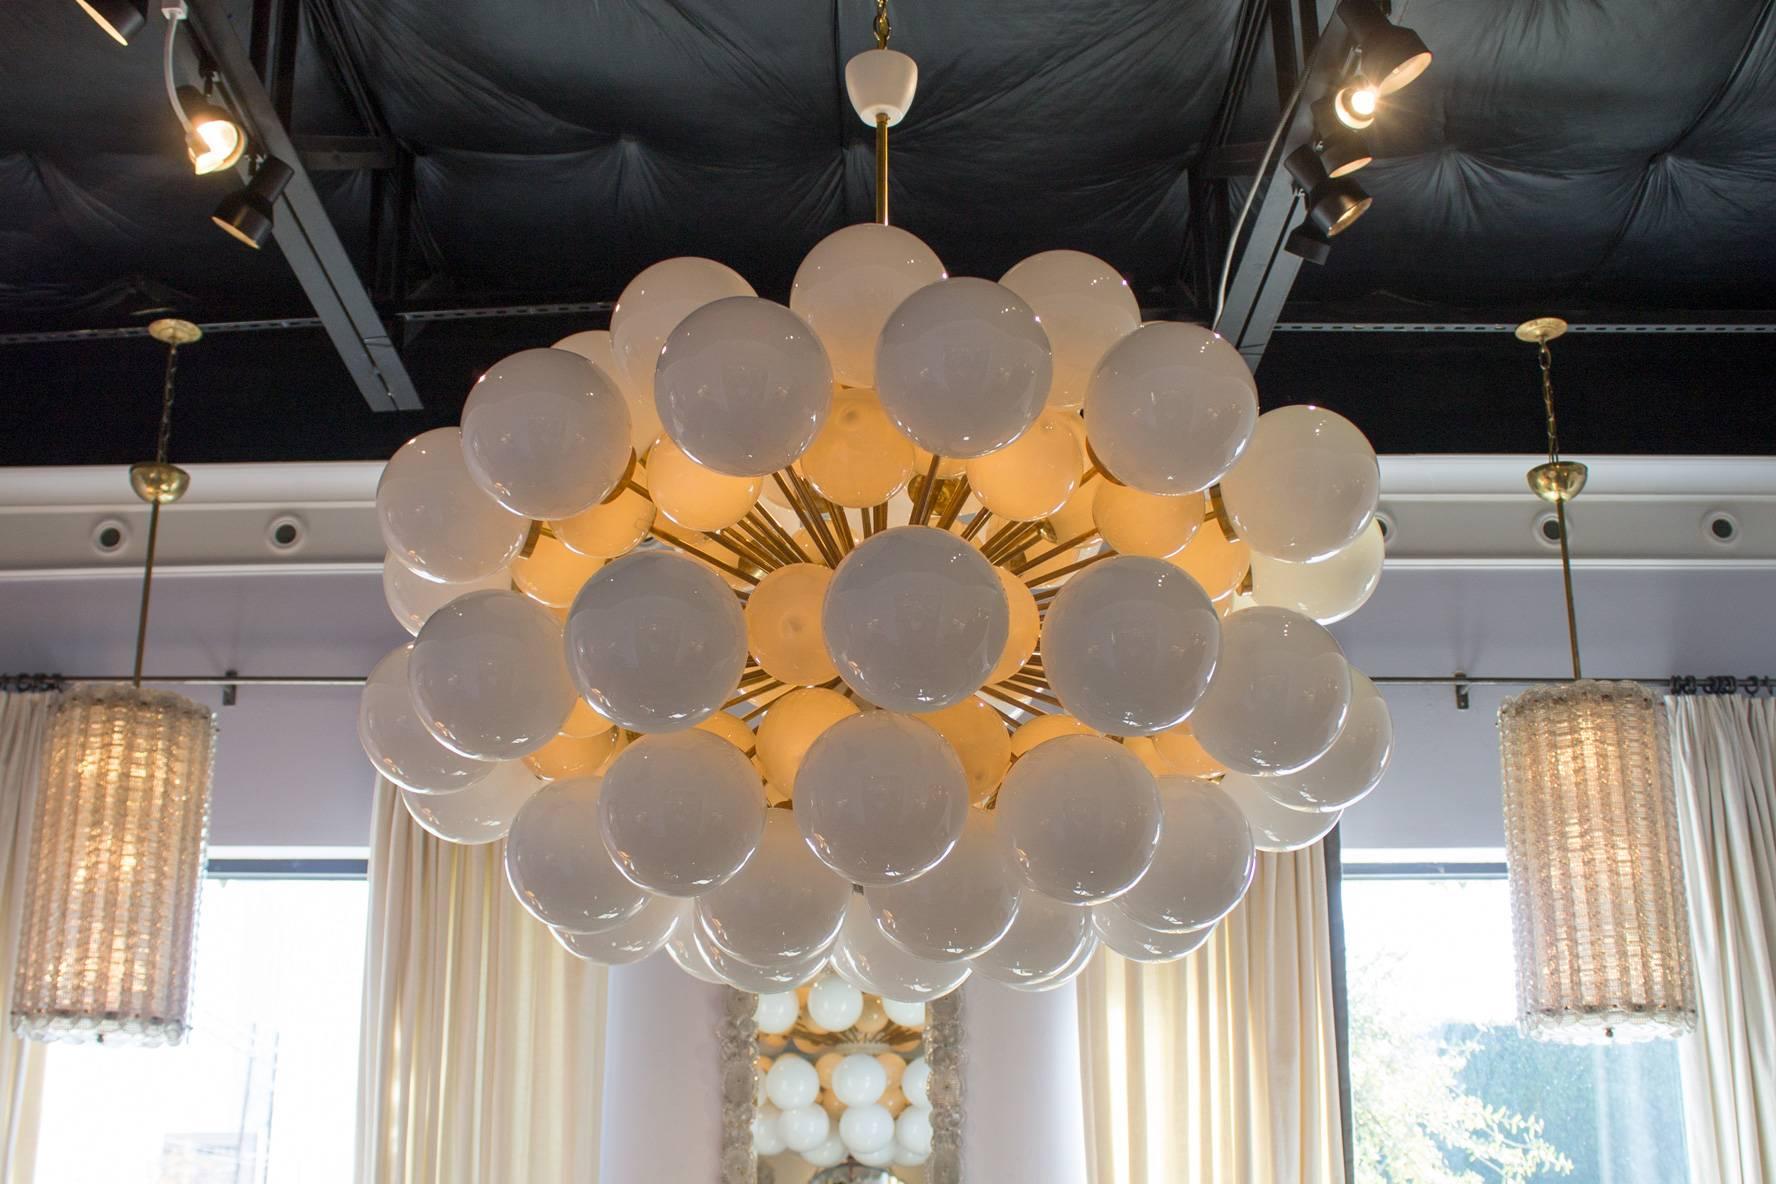 This chandelier in the style of Stilnovo features 114 white & grey handblown glass spheres - mounted on an elaborate brass frame.
